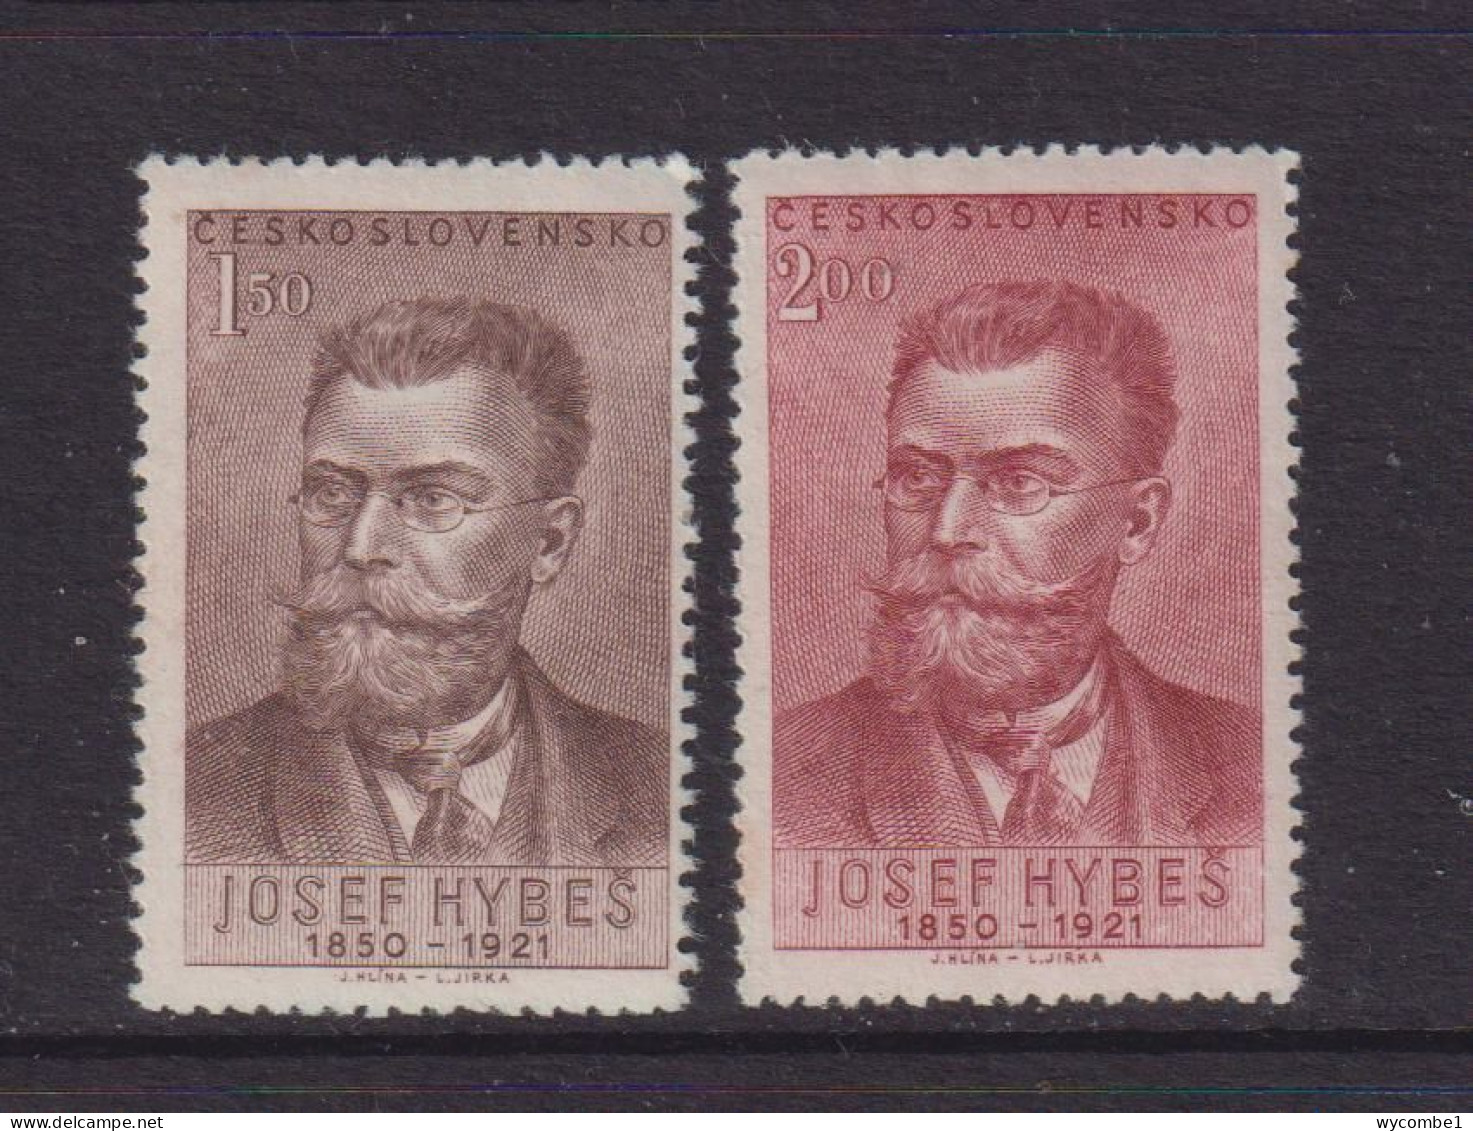 CZECHOSLOVAKIA  - 1951  Hybes Set   Never Hinged Mint - Unused Stamps